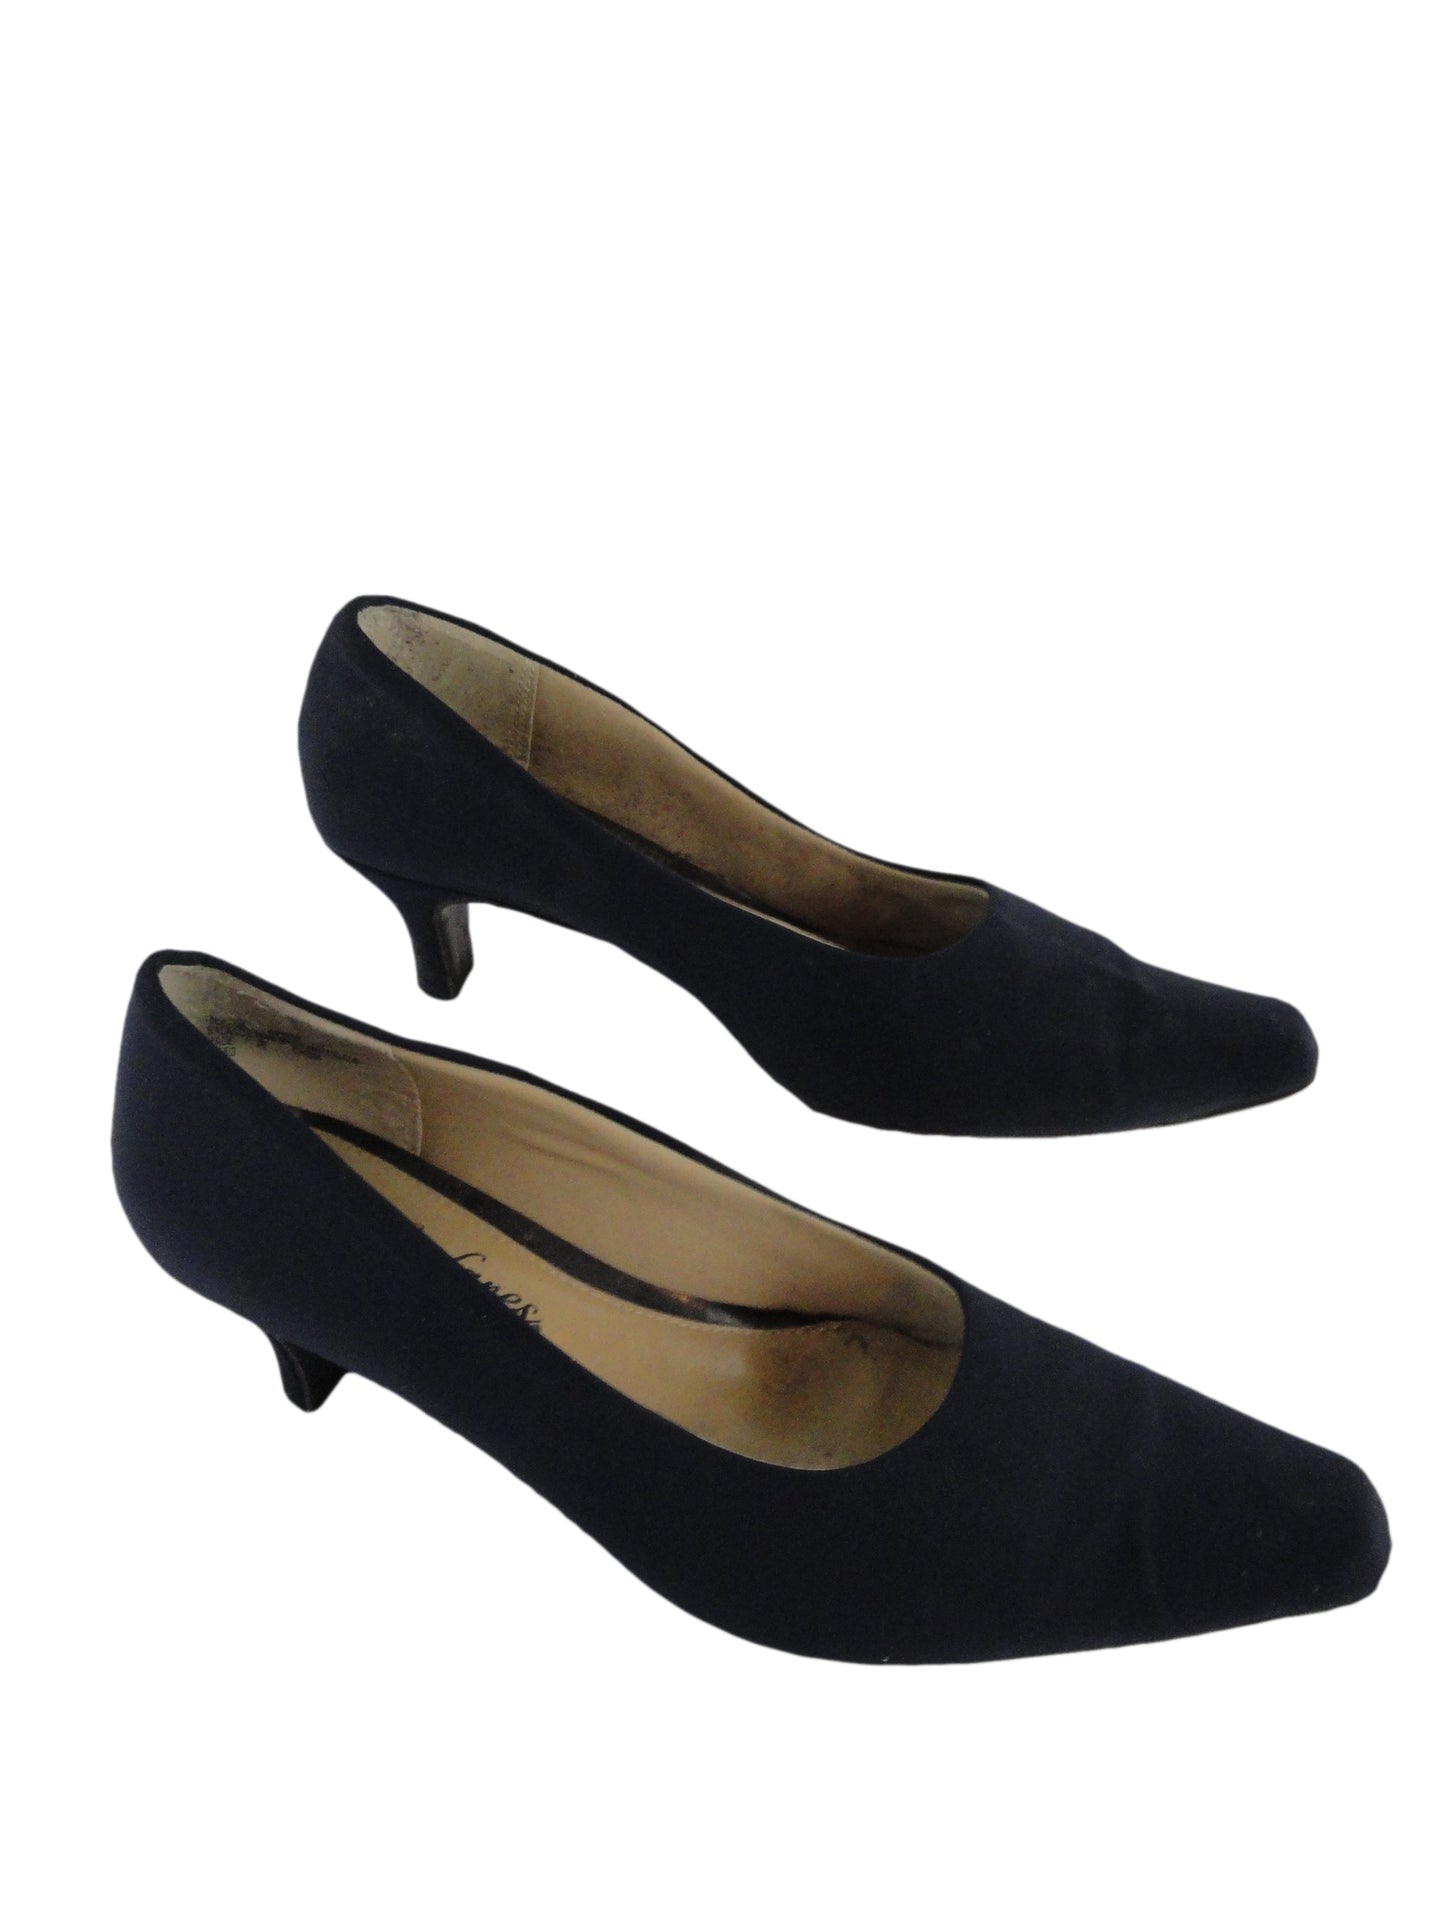 Load image into Gallery viewer, Fanfares Shoes Leather Navy 9  SKU 000279-9
